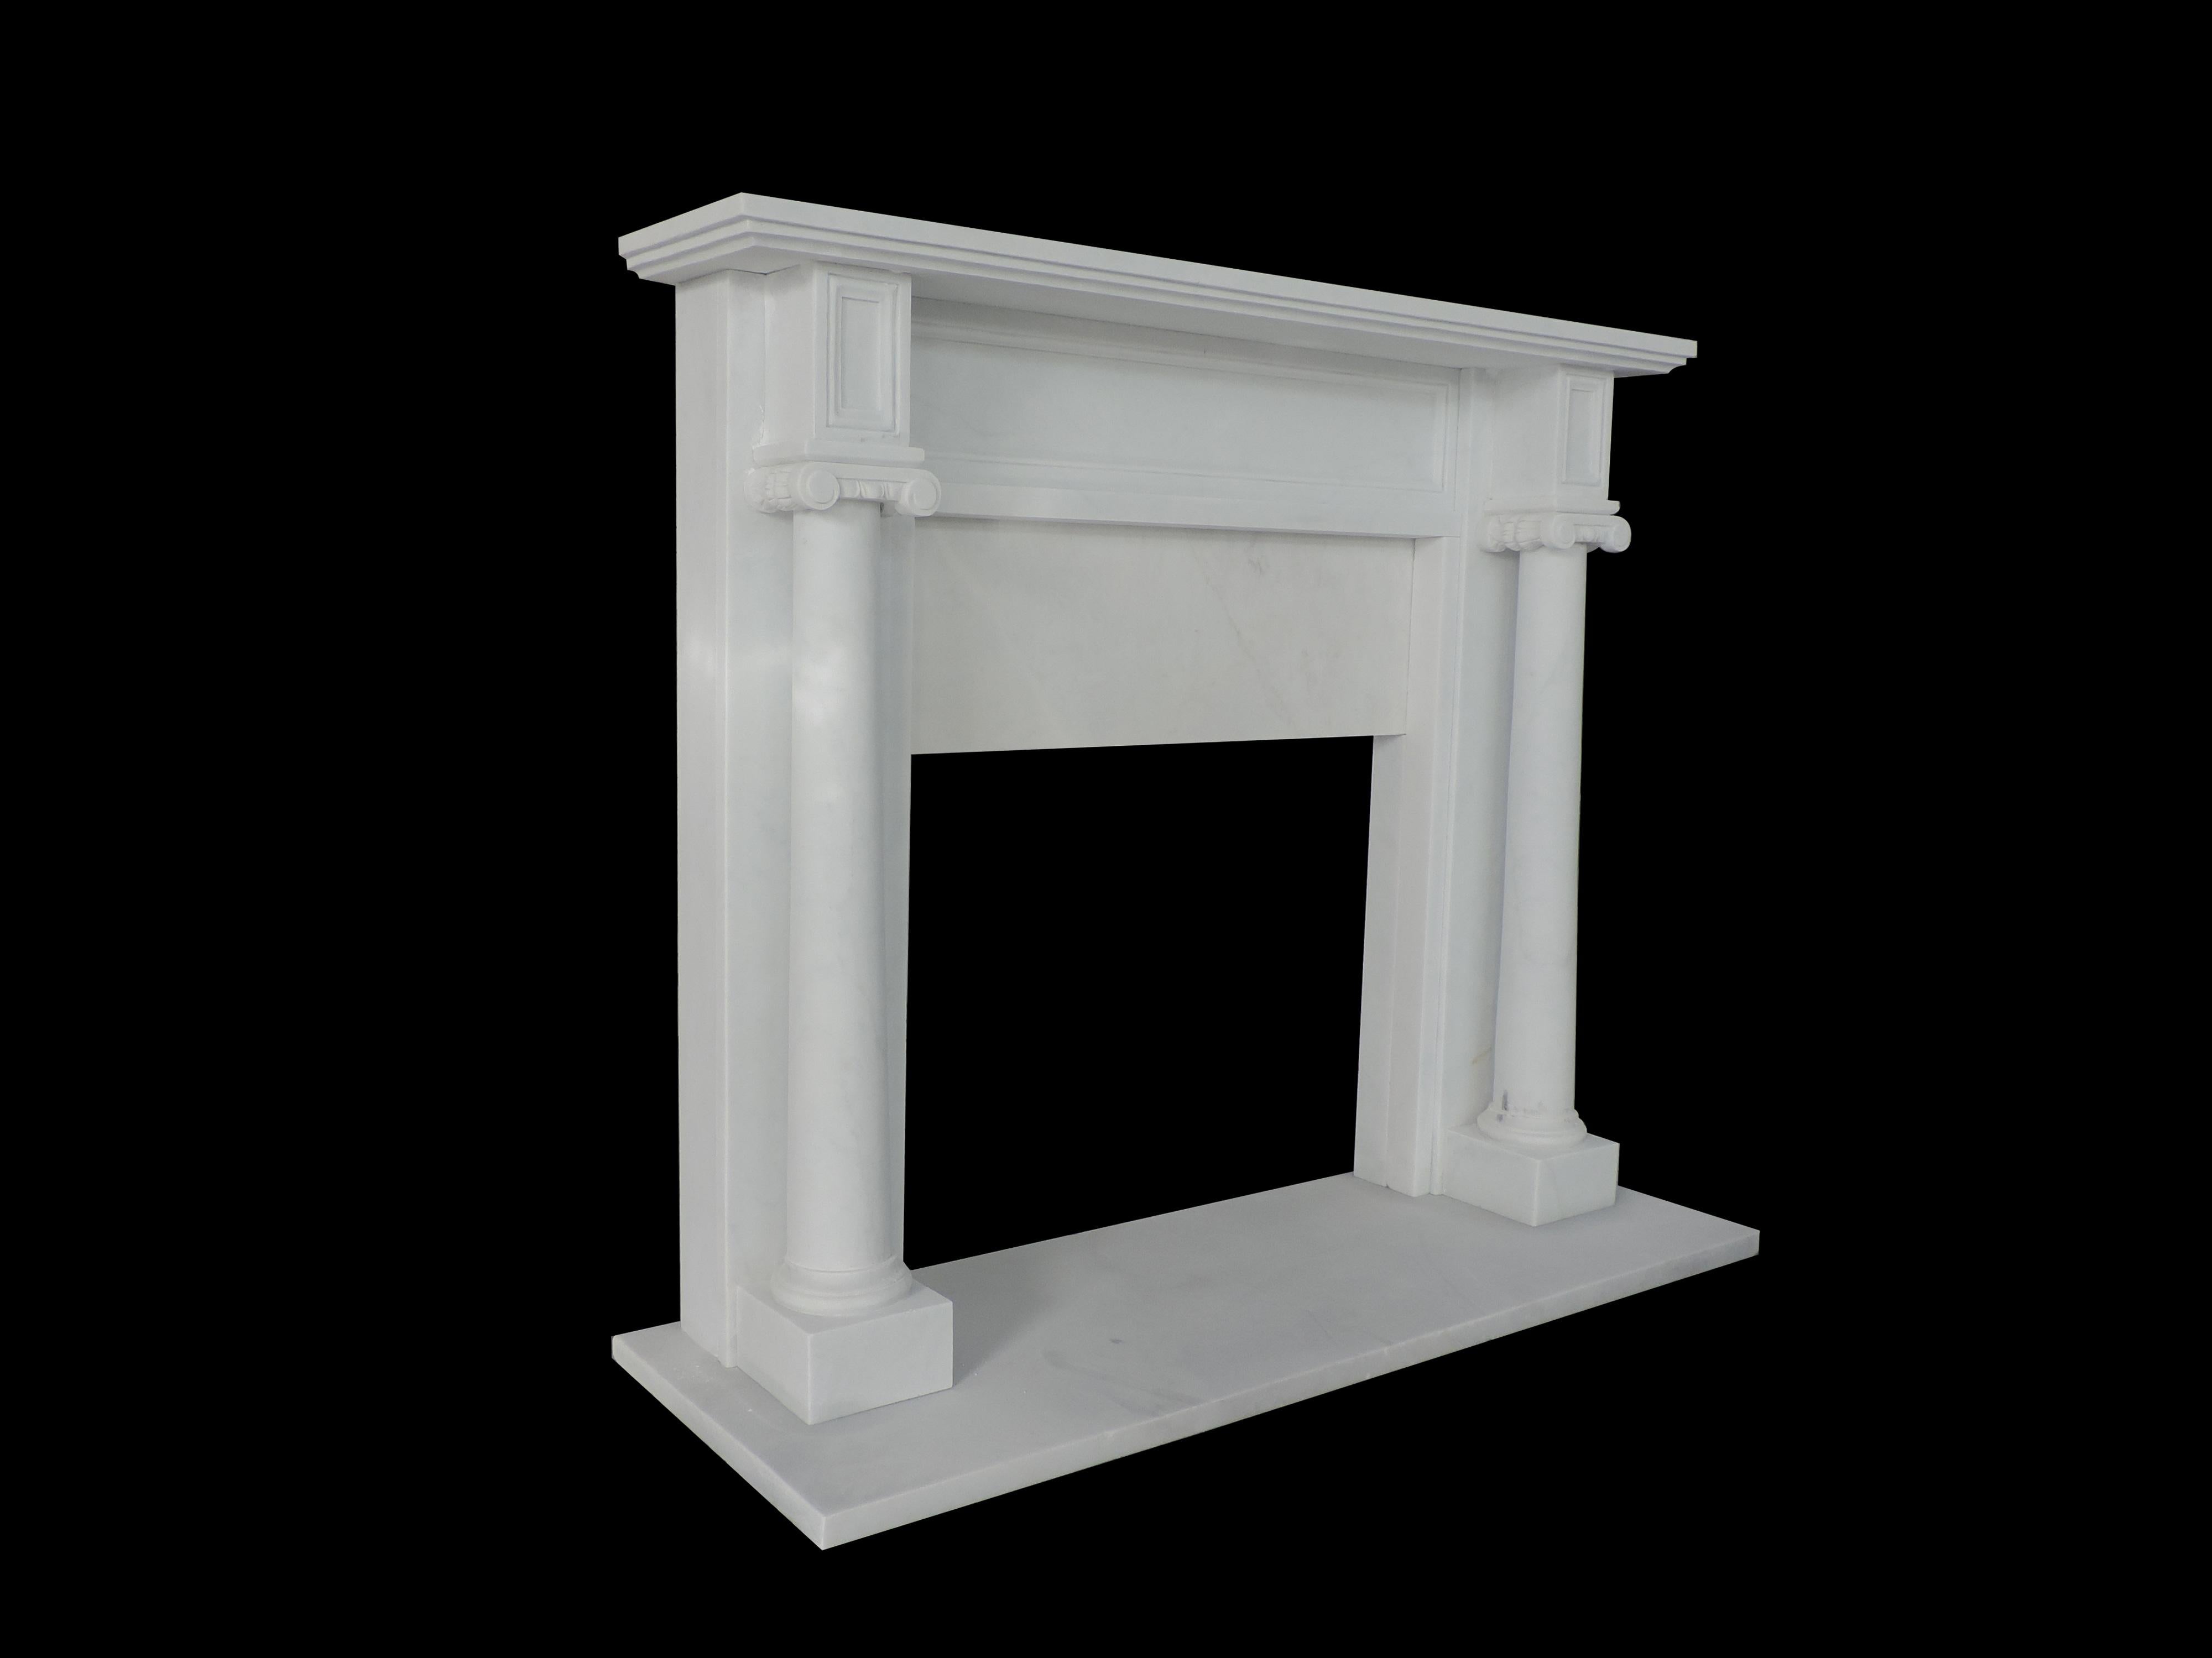 The mantle is hand carved out of natural blocks of marble from the quarry and is priced competitively.